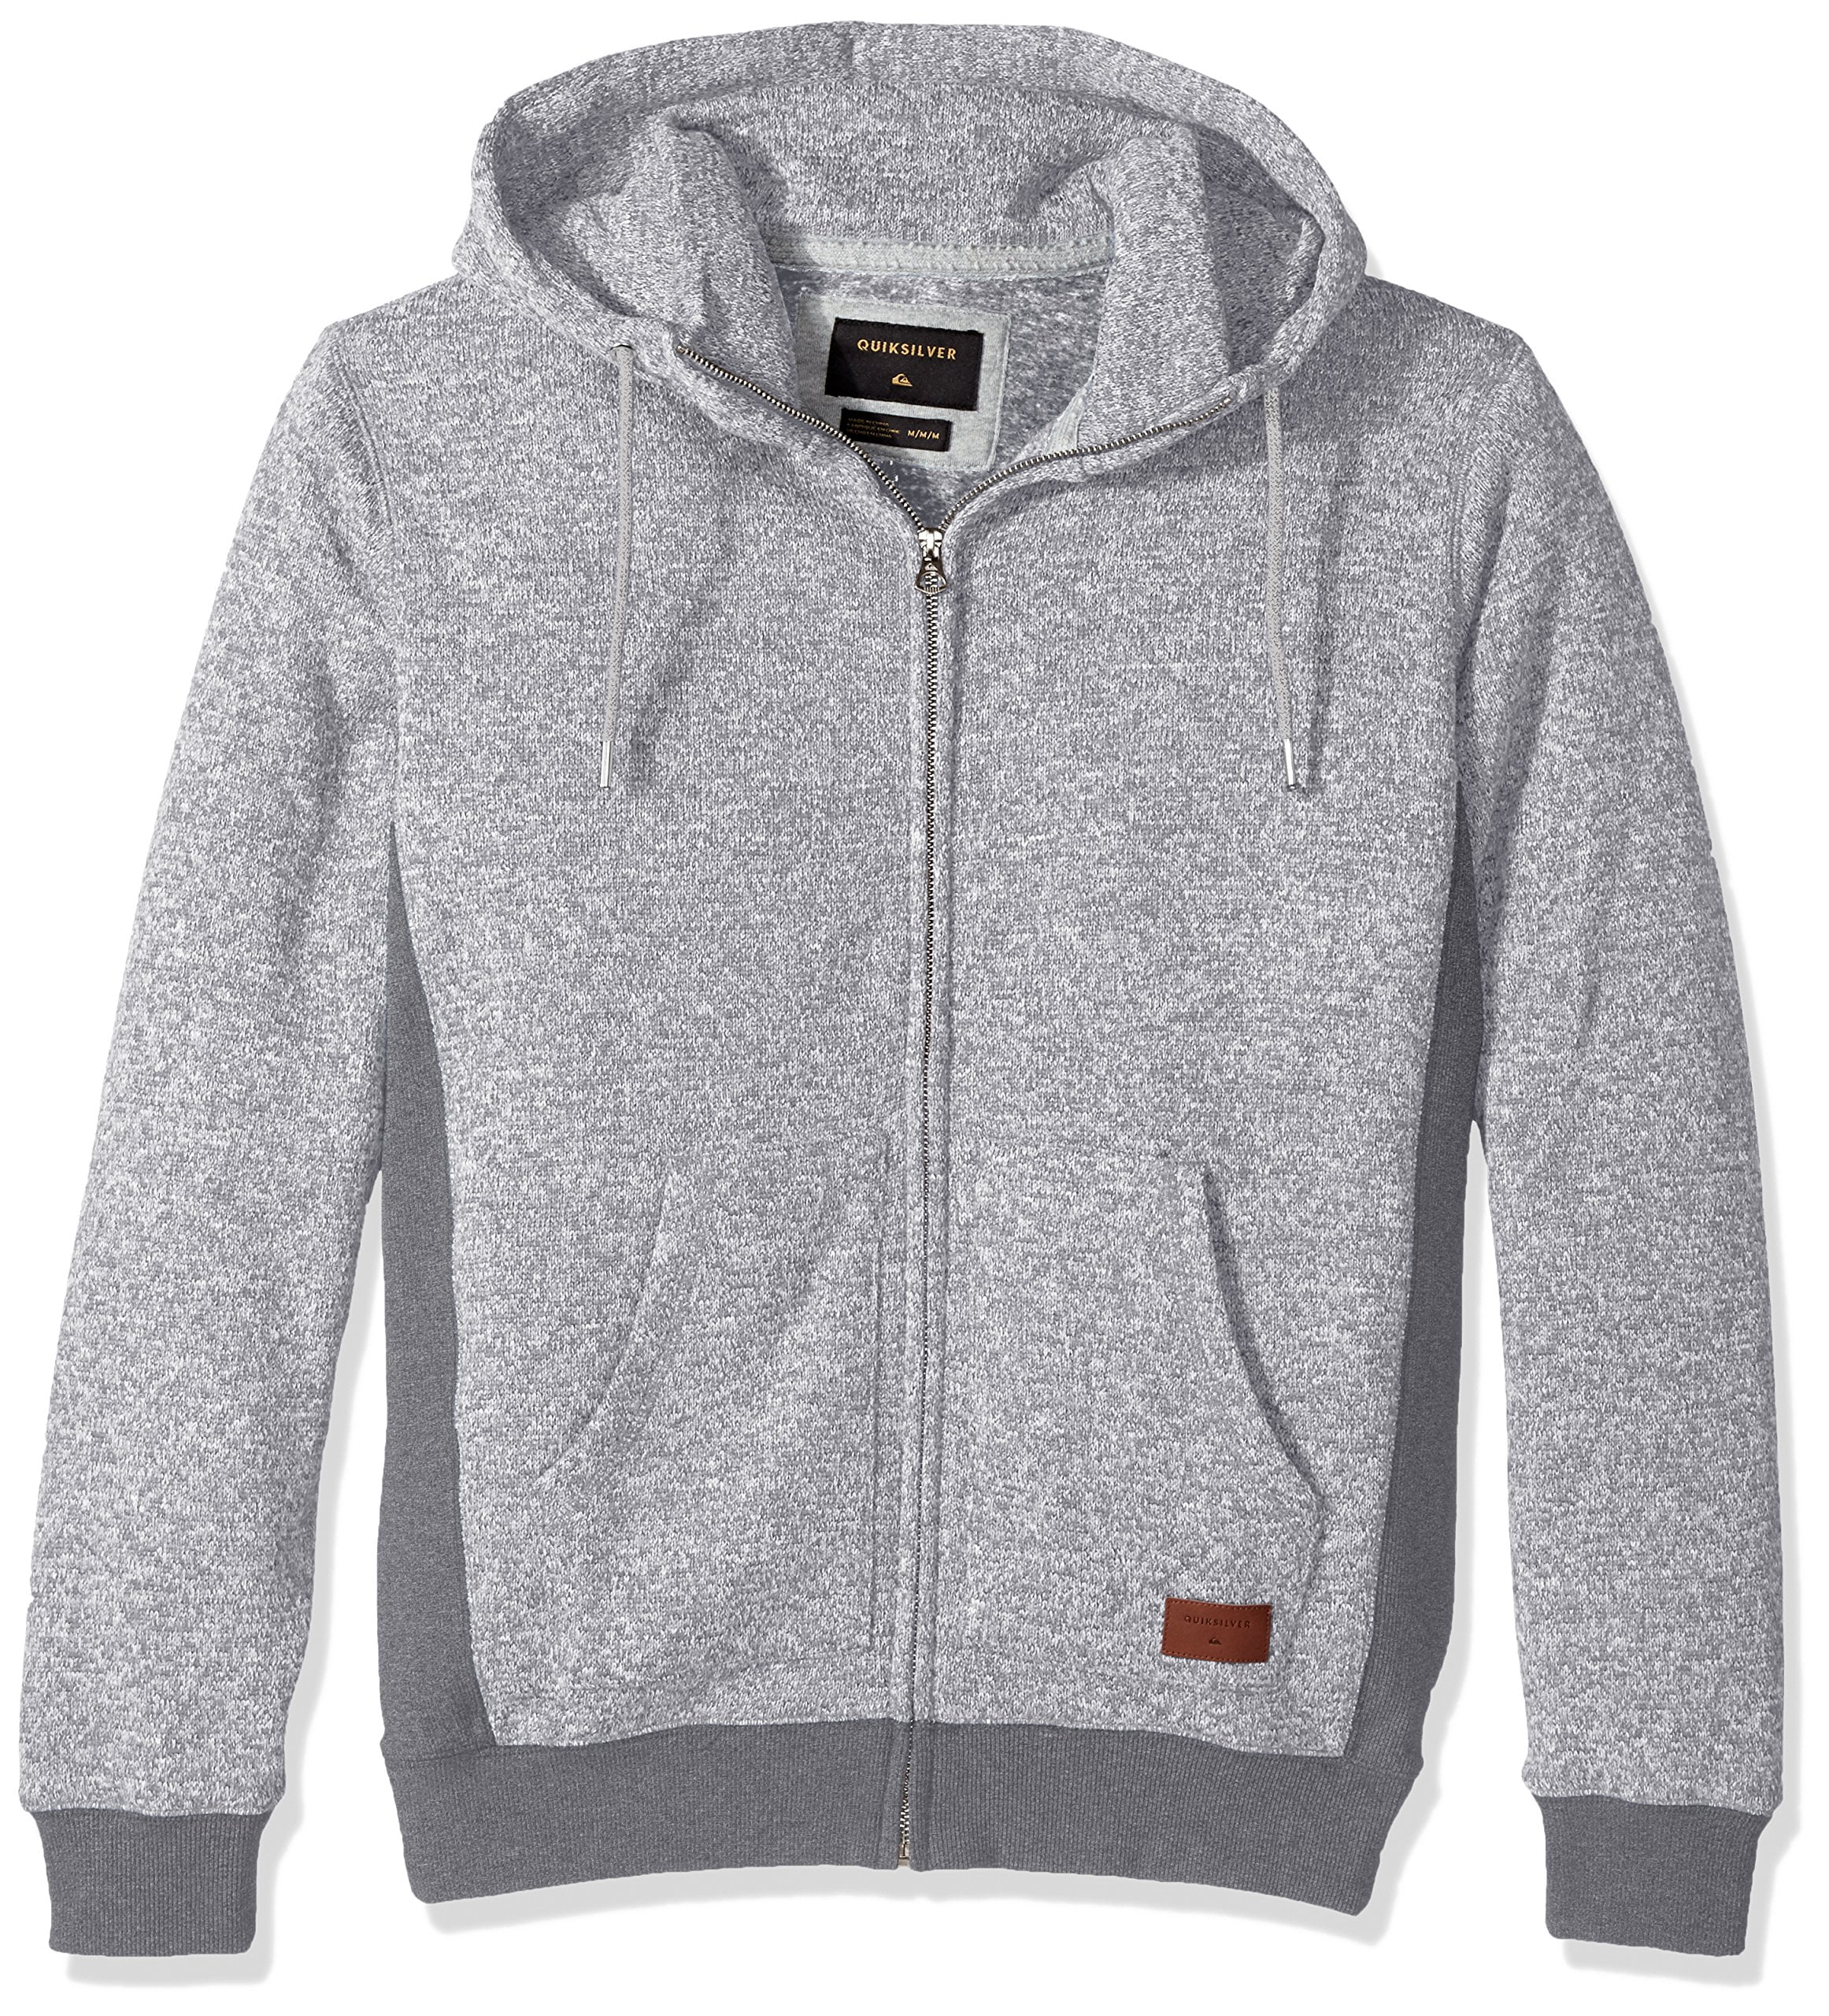 Quiksilver - Quiksilver NEW Gray Mens Size Large L Keller Hooded Knit ...